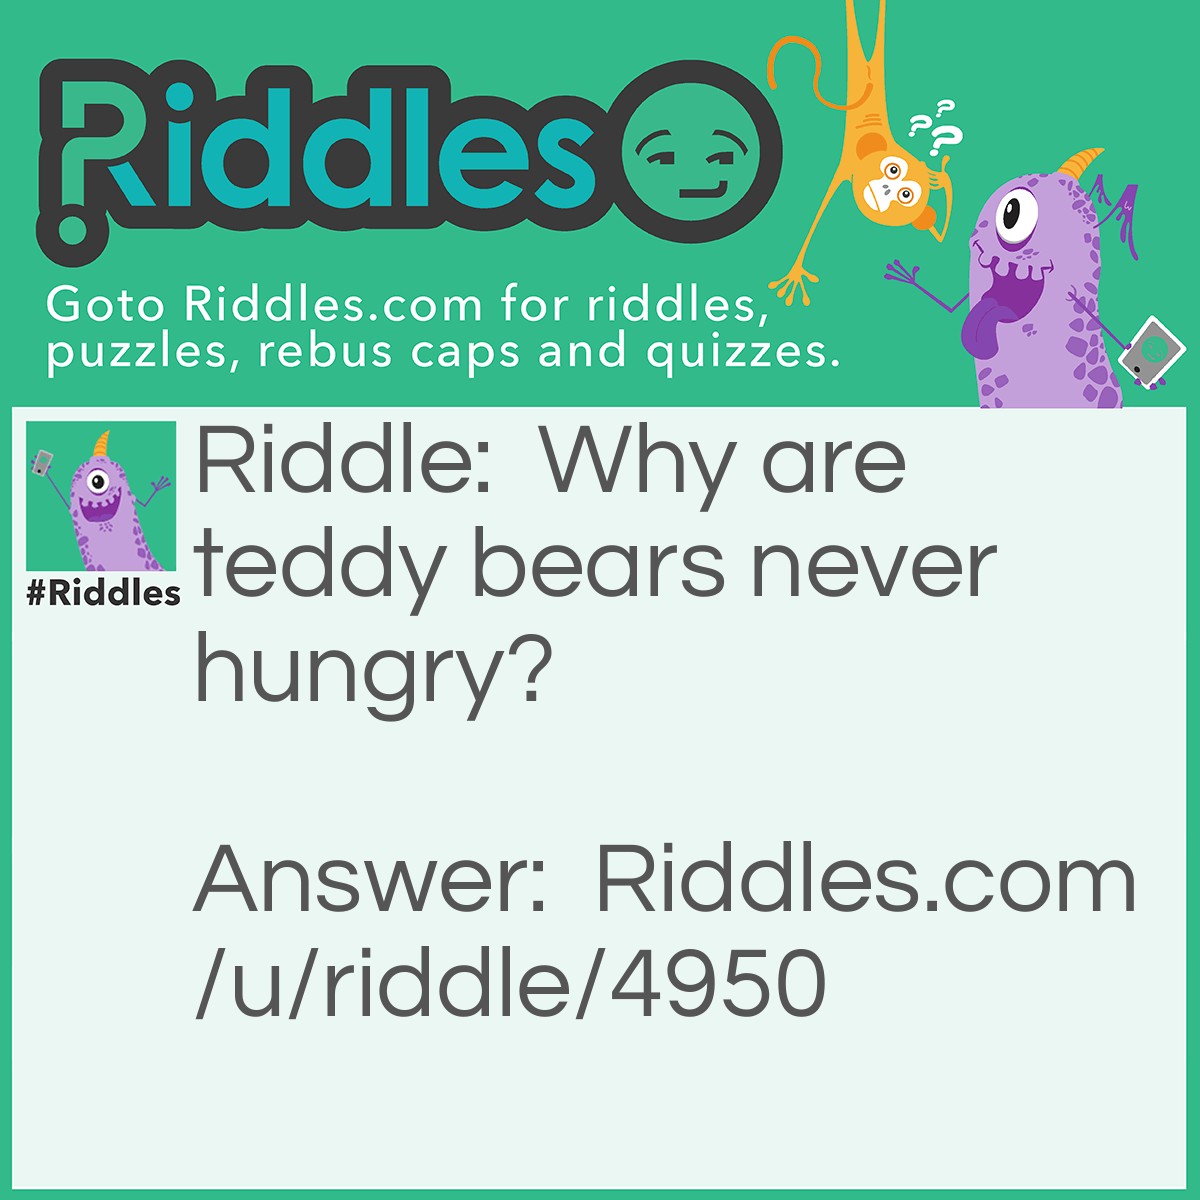 Riddle: Why are teddy bears never hungry? Answer: Because they are stuffed.